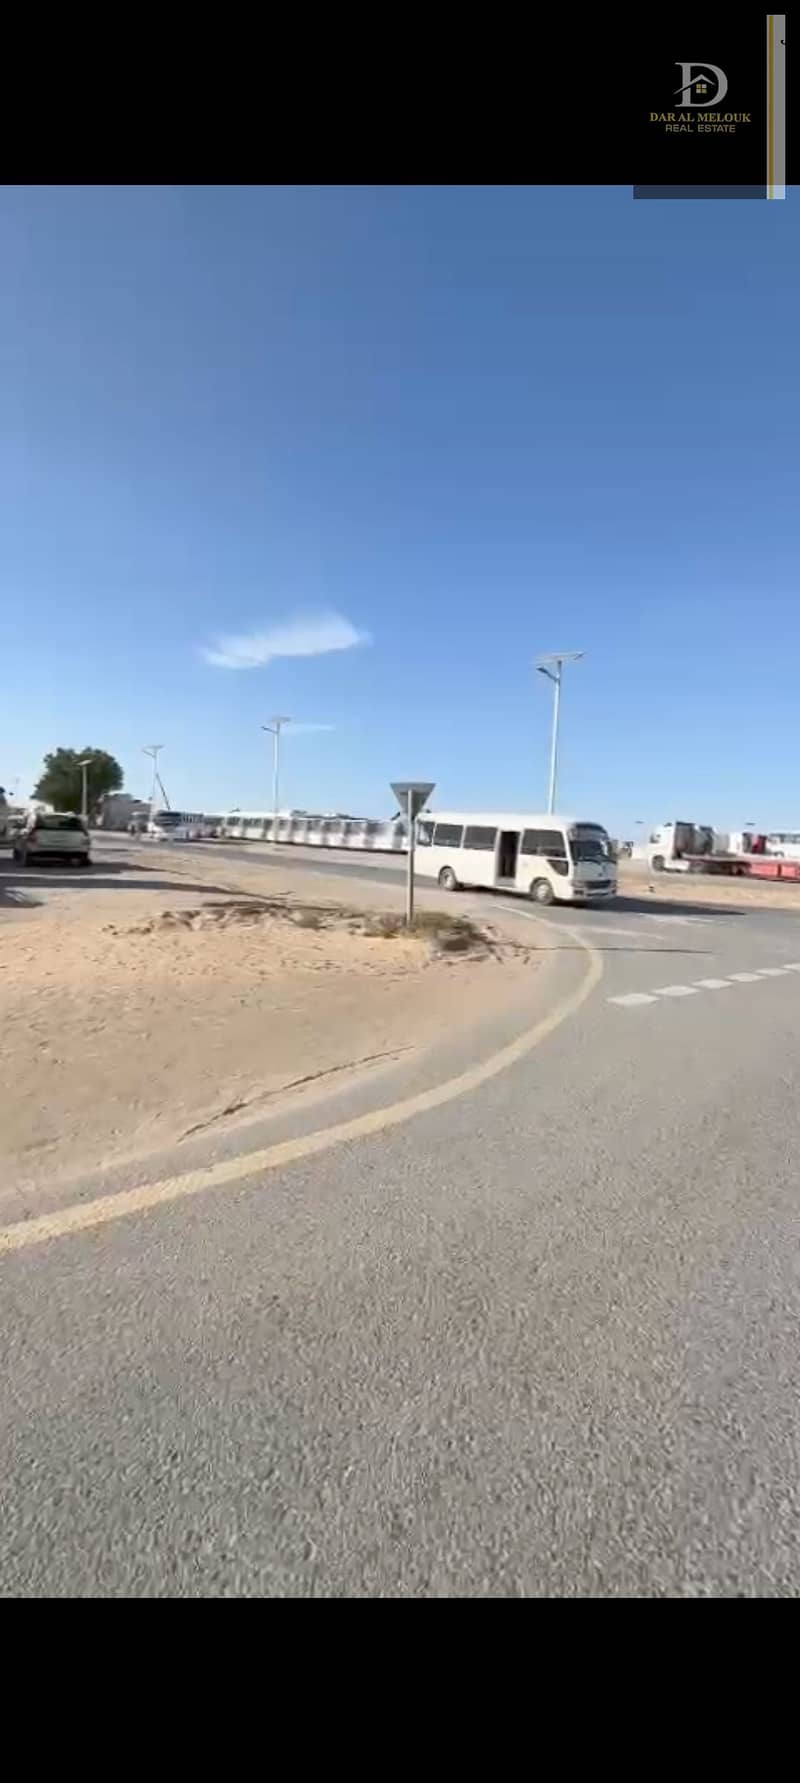 For sale in Sharjah, Al Sajaa Industrial Area, industrial land, area of ​​80,000 feet, corner on two streets, 97 meter street and 24 meter street, excellent location, close to the Emirates Industrial City, close to the transit Emirates Road, close to Khor